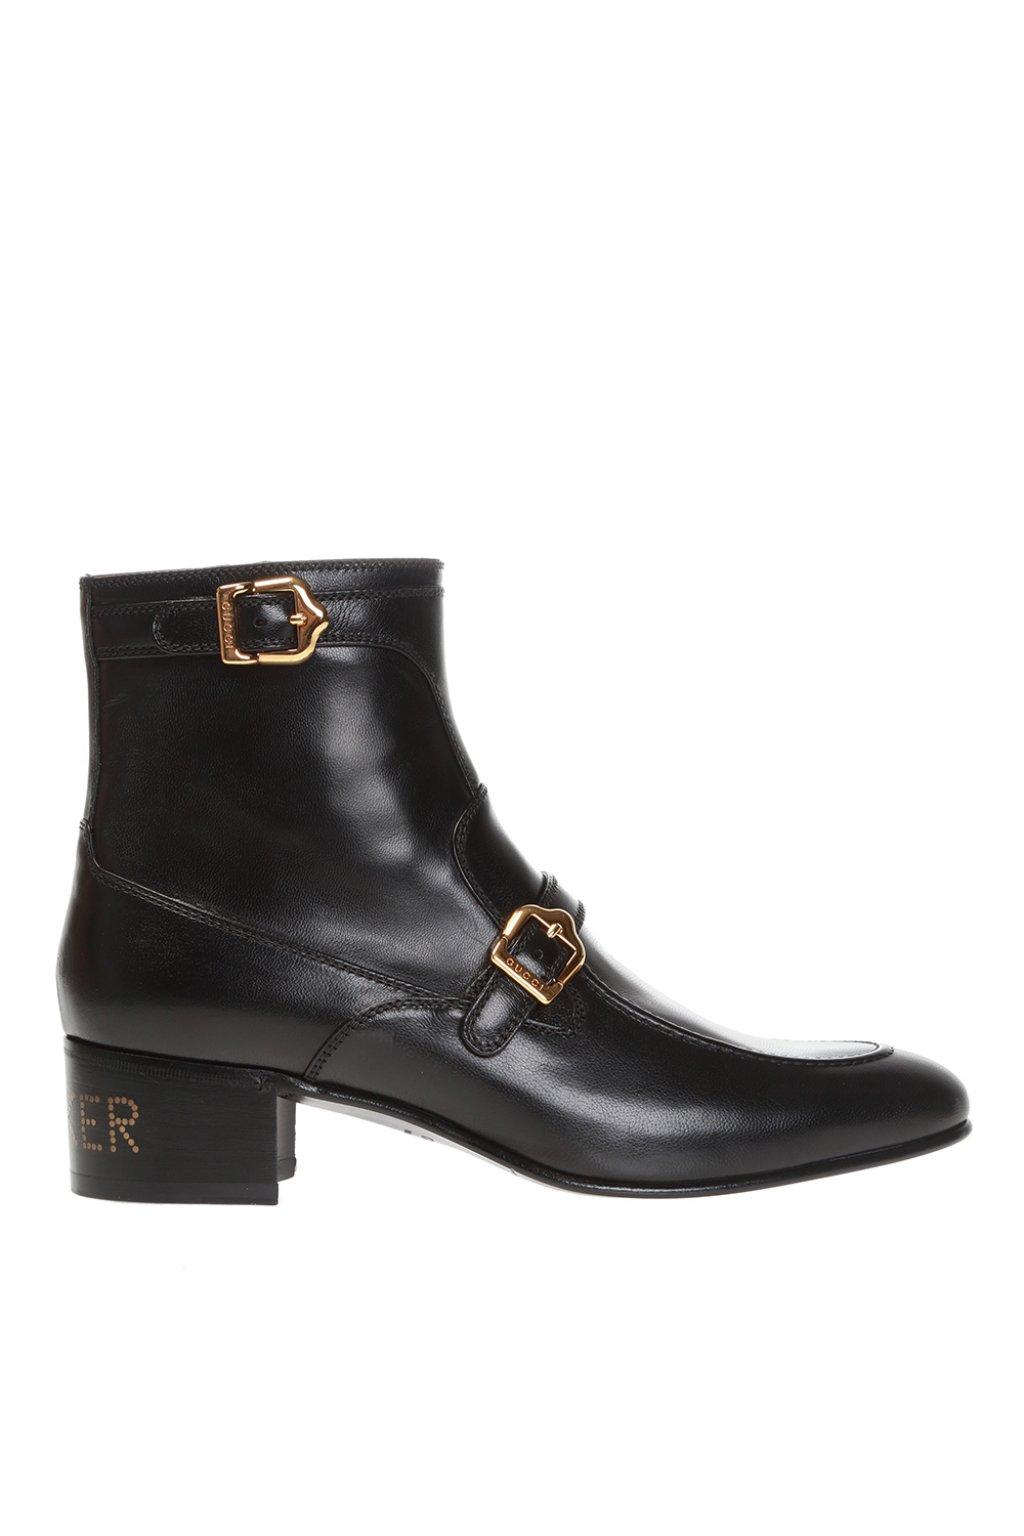 Gucci Sucker Leather Boots in Black for Men | Lyst